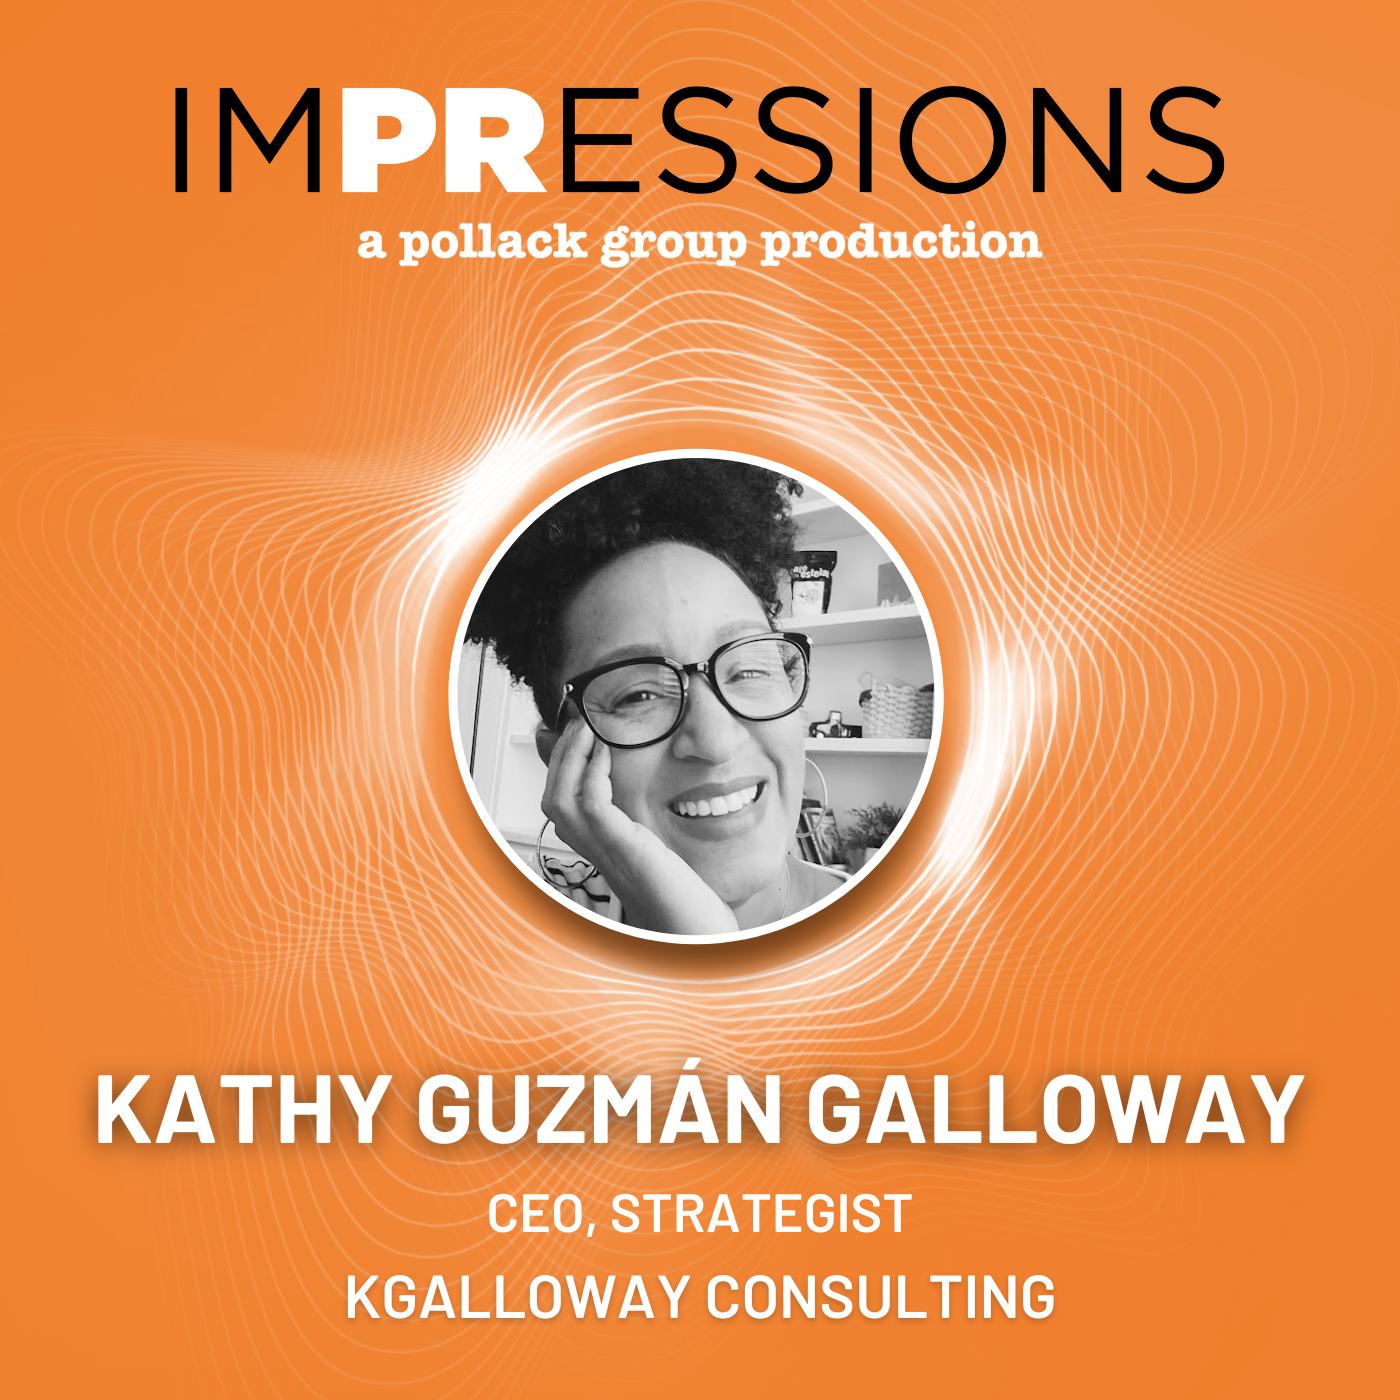 Impressions poster with smiling Kathy Guzman Galloway